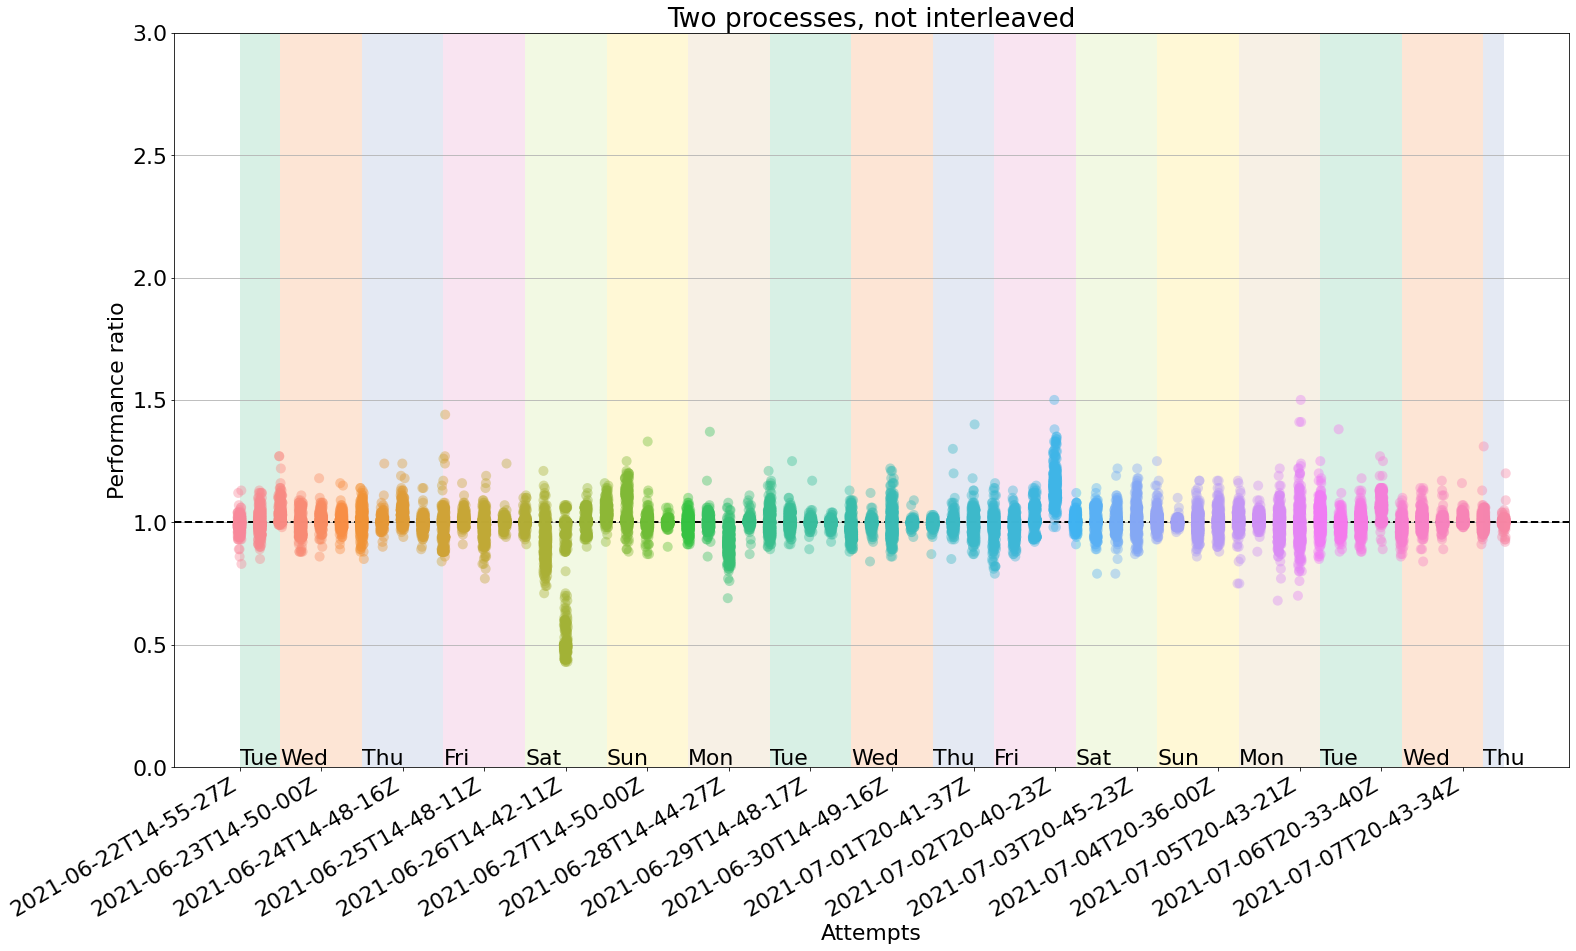 Reliability of benchmarks in GitHub Actions, no interleaving. With no interleaving, the vertical
spread is more evident, with several clouds spreading beyond the desired interval.
One particular outlier happened on the first Saturday, with half the cloud below 0.75.
This 2D plot shows a 16-day timeseries in the X axis. Each data point in the X axis corresponds
to a cloud of 75 measurements (one per benchmark test). The y-axis spread of each cloud corresponds
to the performance ratio. Ideal measurements would have a performance ratio of 1.0, since both
runs returned the exact same performance. In practice this does not happen.